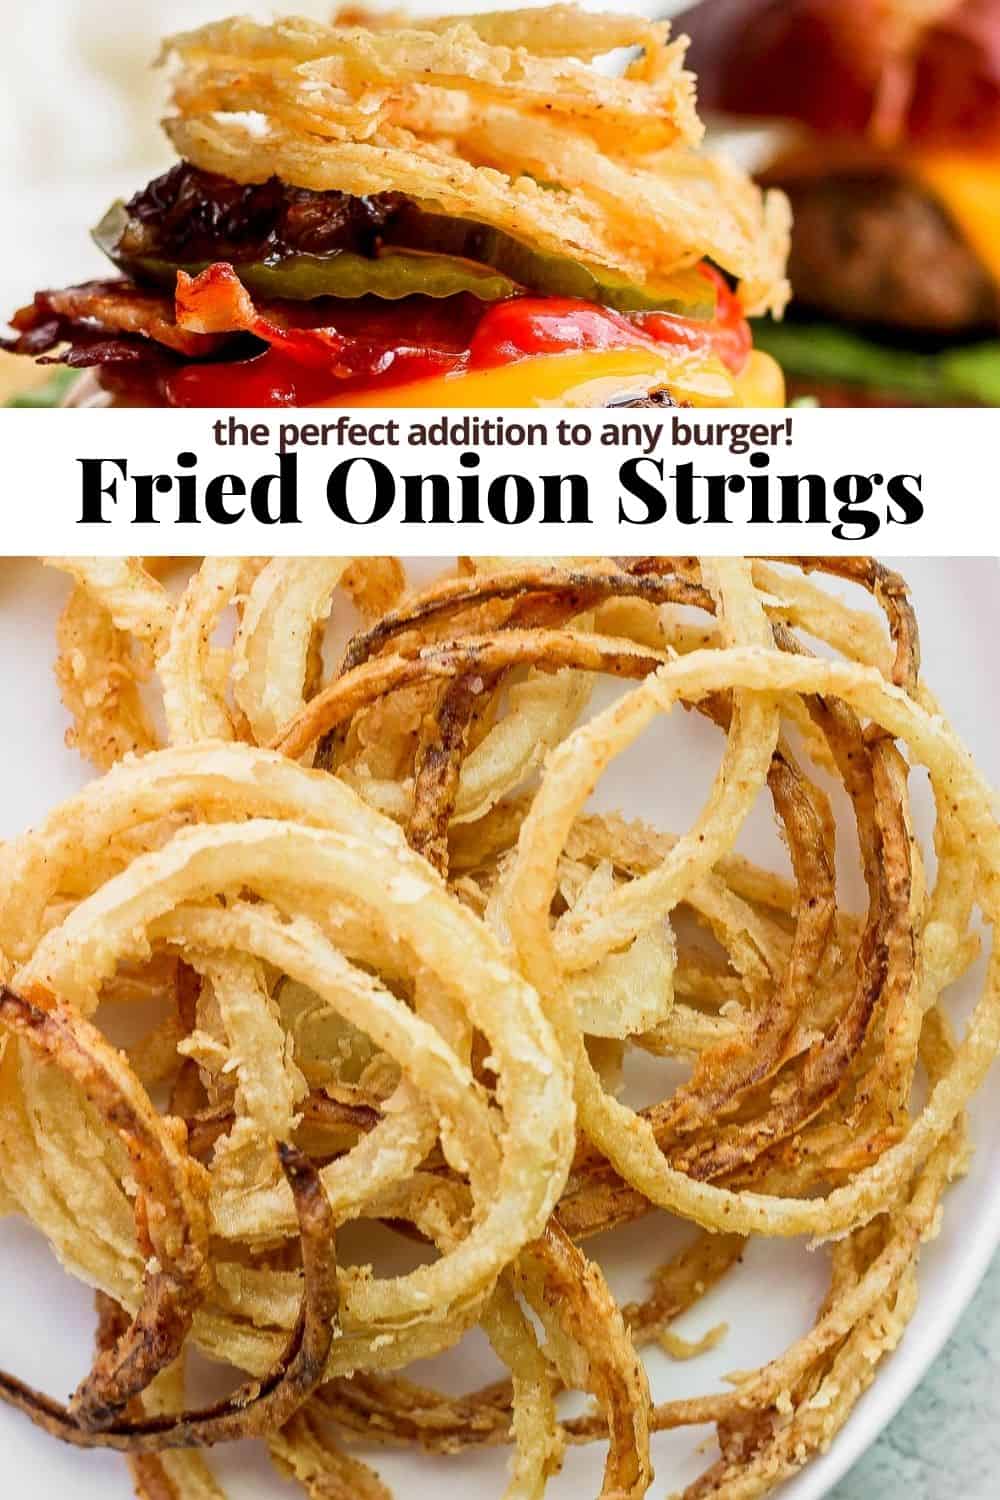 Pinterest image for fried onion strings.